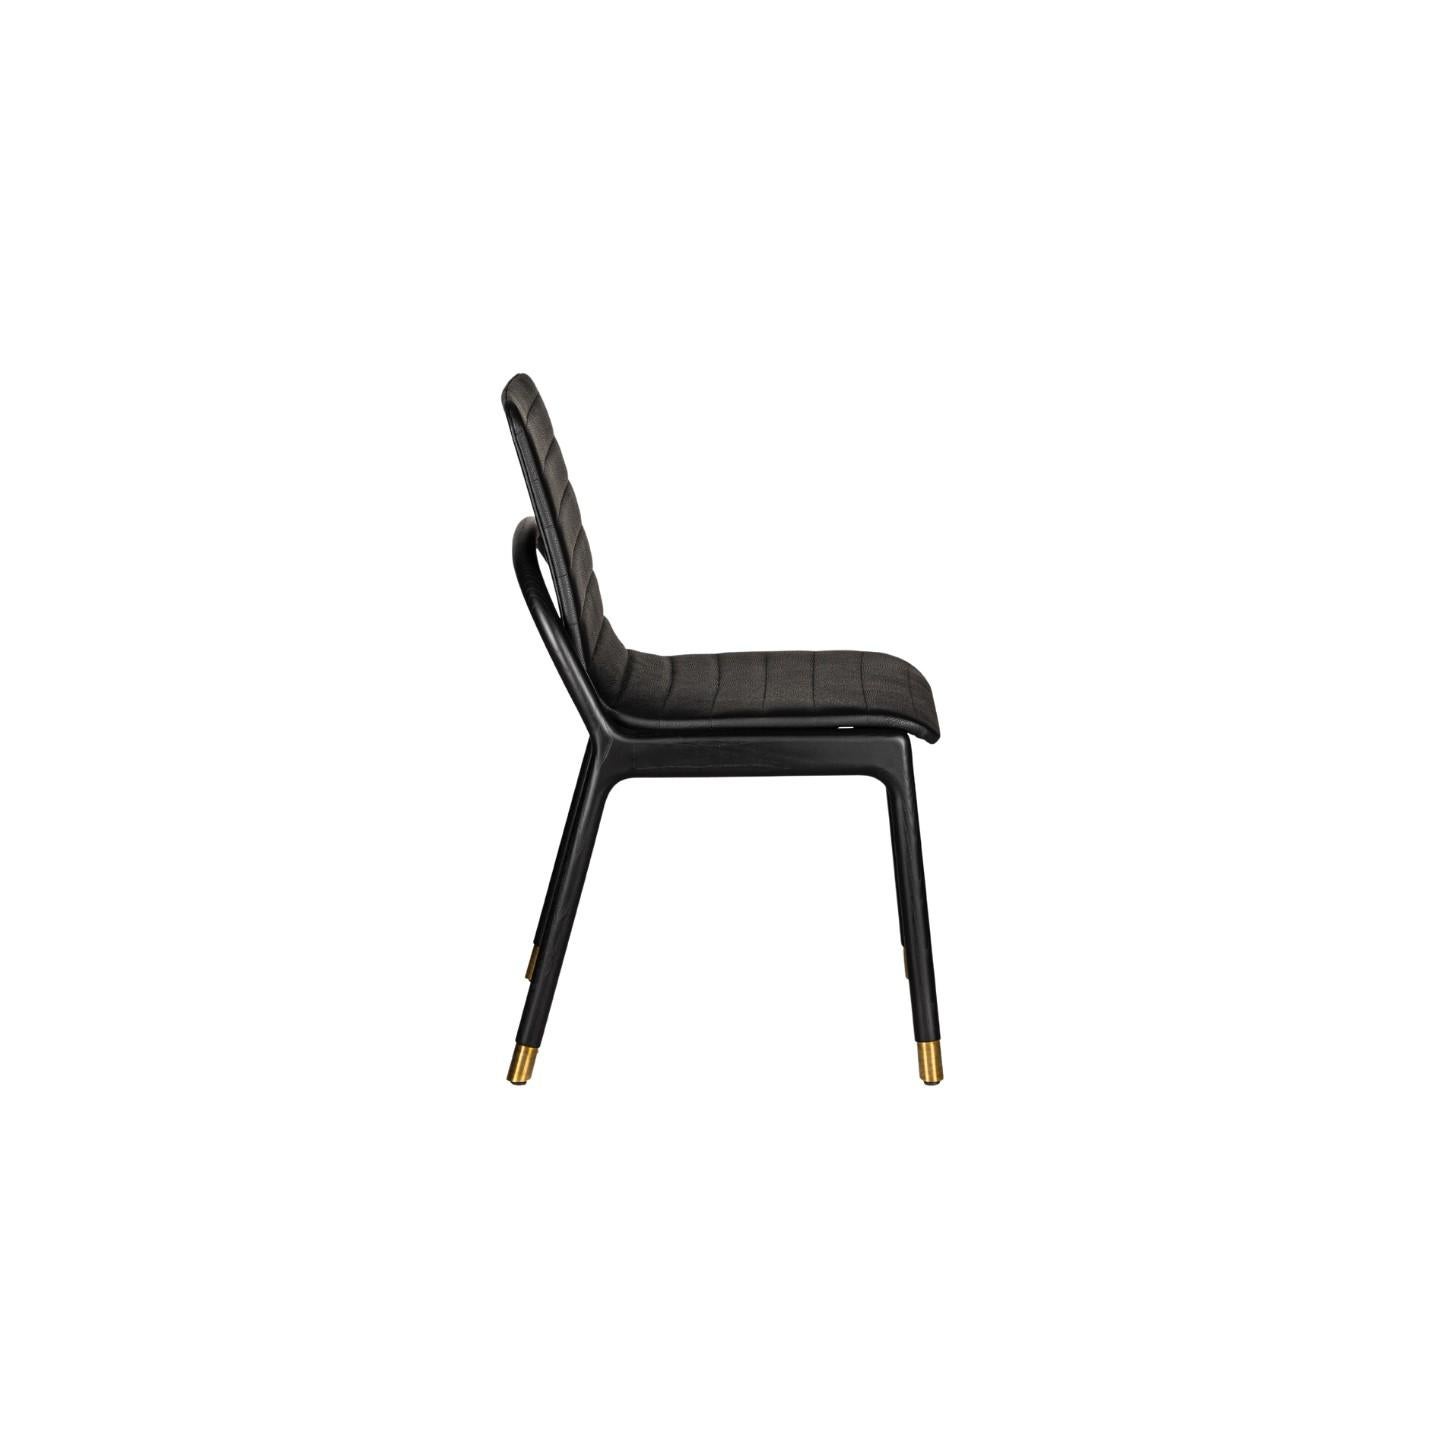 Contemporary style Joyce dining chair made of ashwood with leather tufted seat and brass tips.
Design Libero Rutilo
